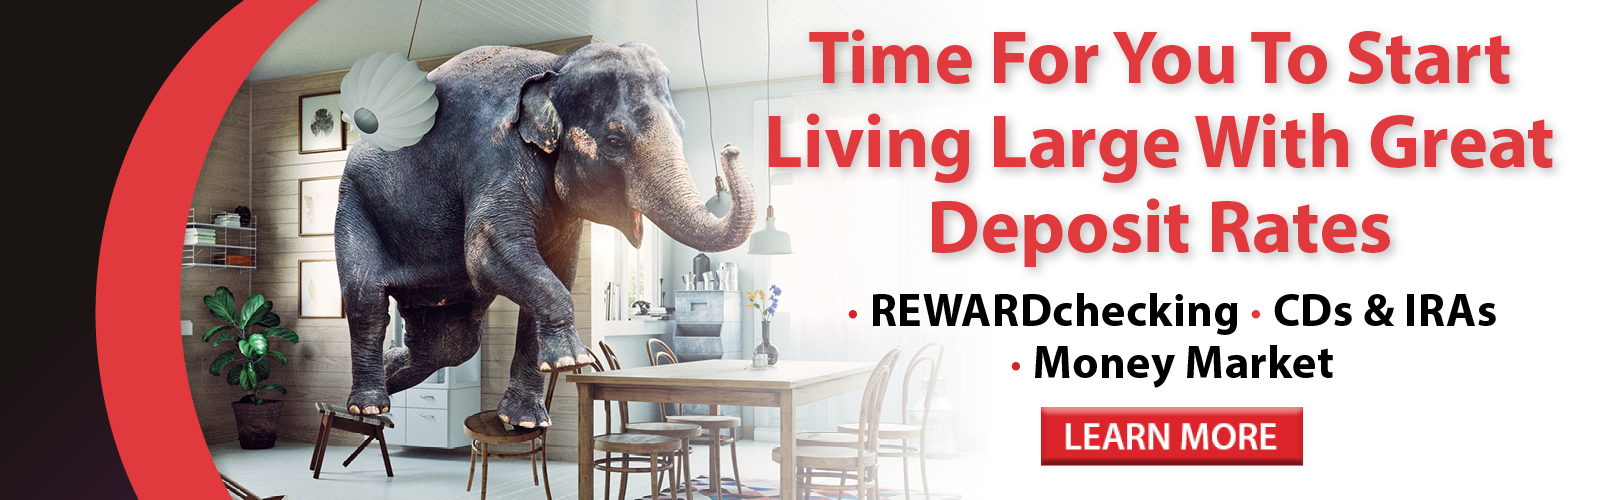 Time For You To Start Living Large With Great Deposit Rates. Click here to learn more.